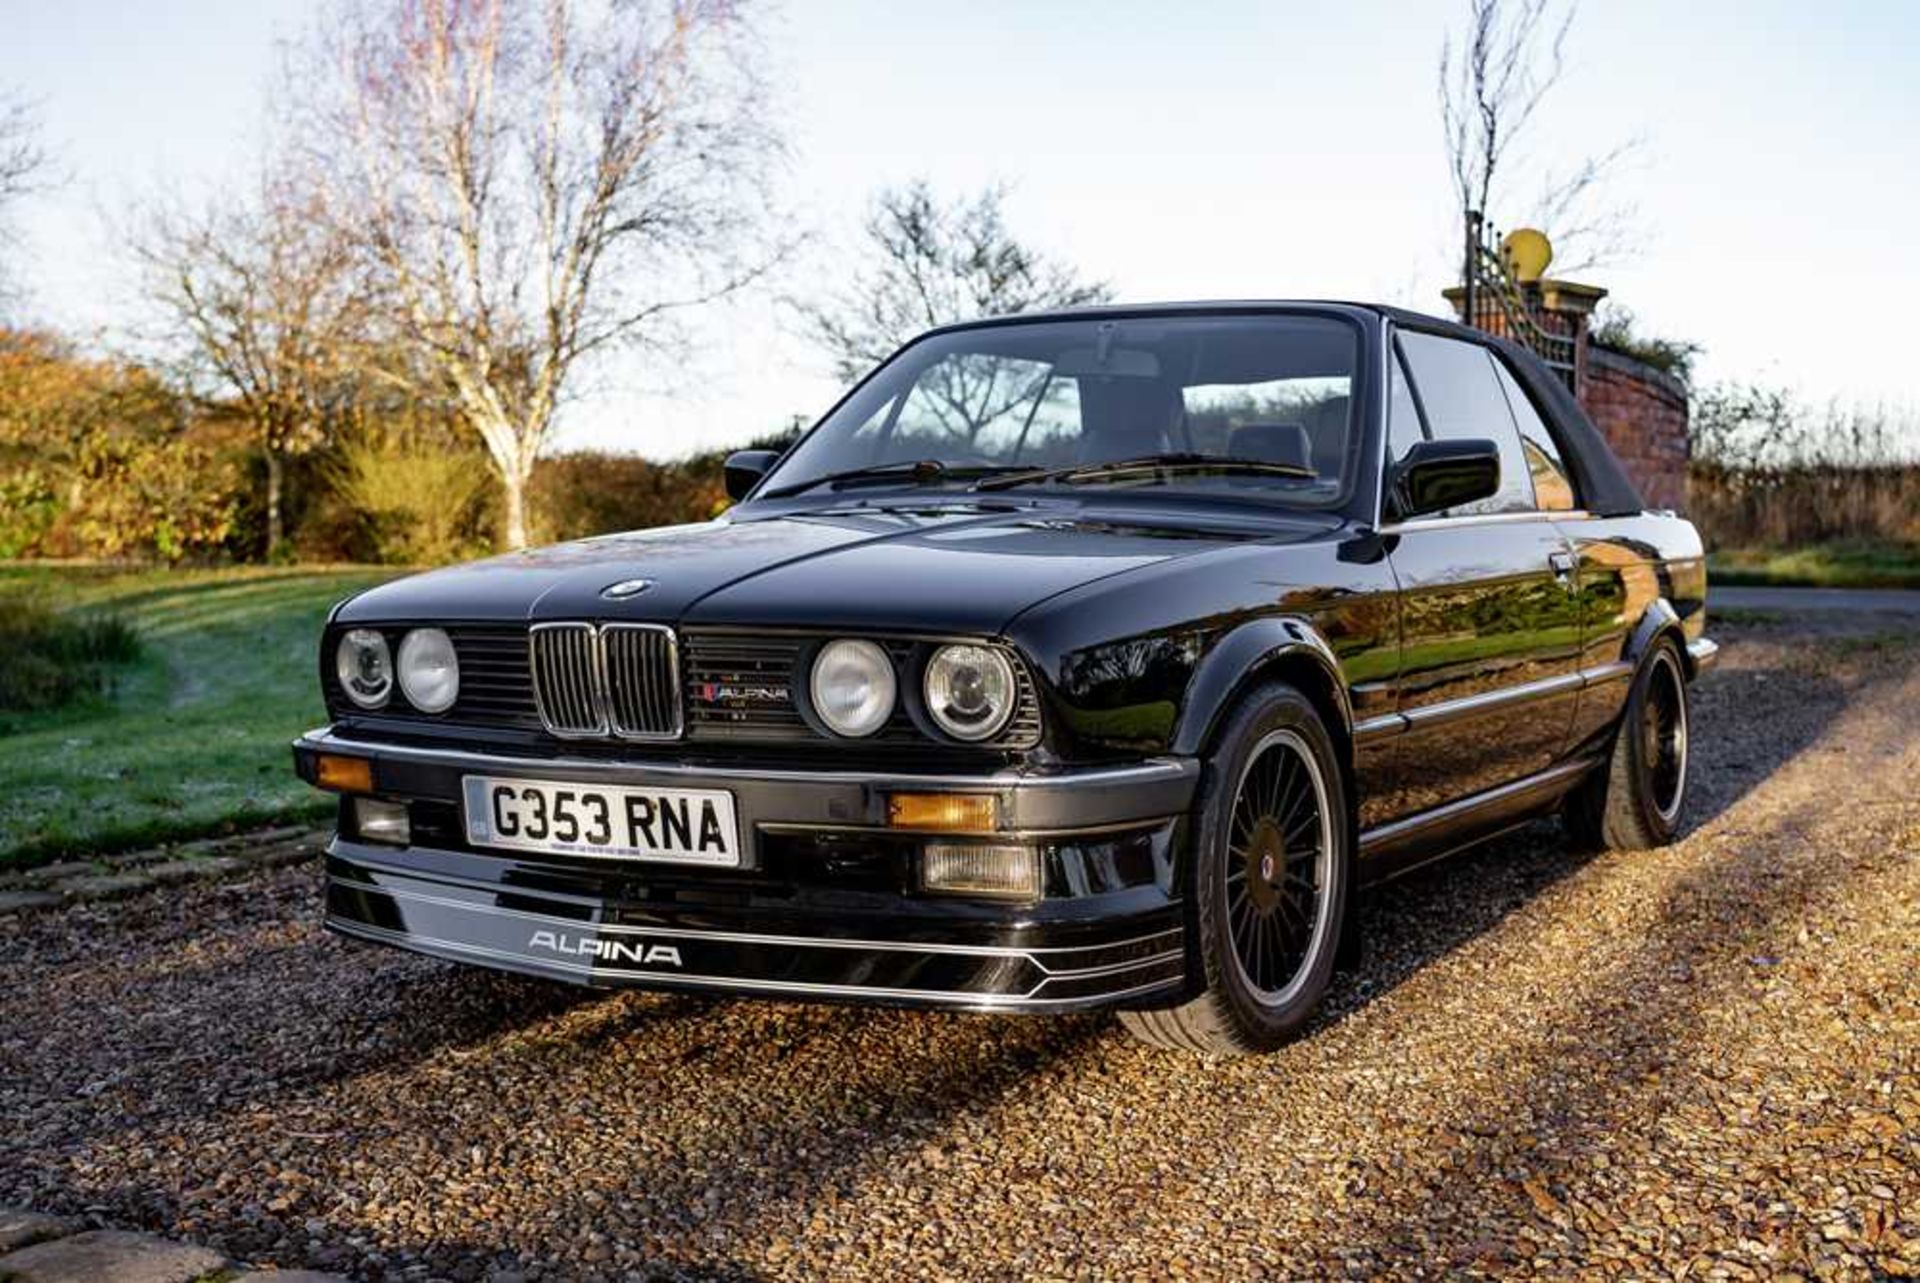 1989 BMW 320i Convertible Converted to Alpina 328i Specification - Image 6 of 51